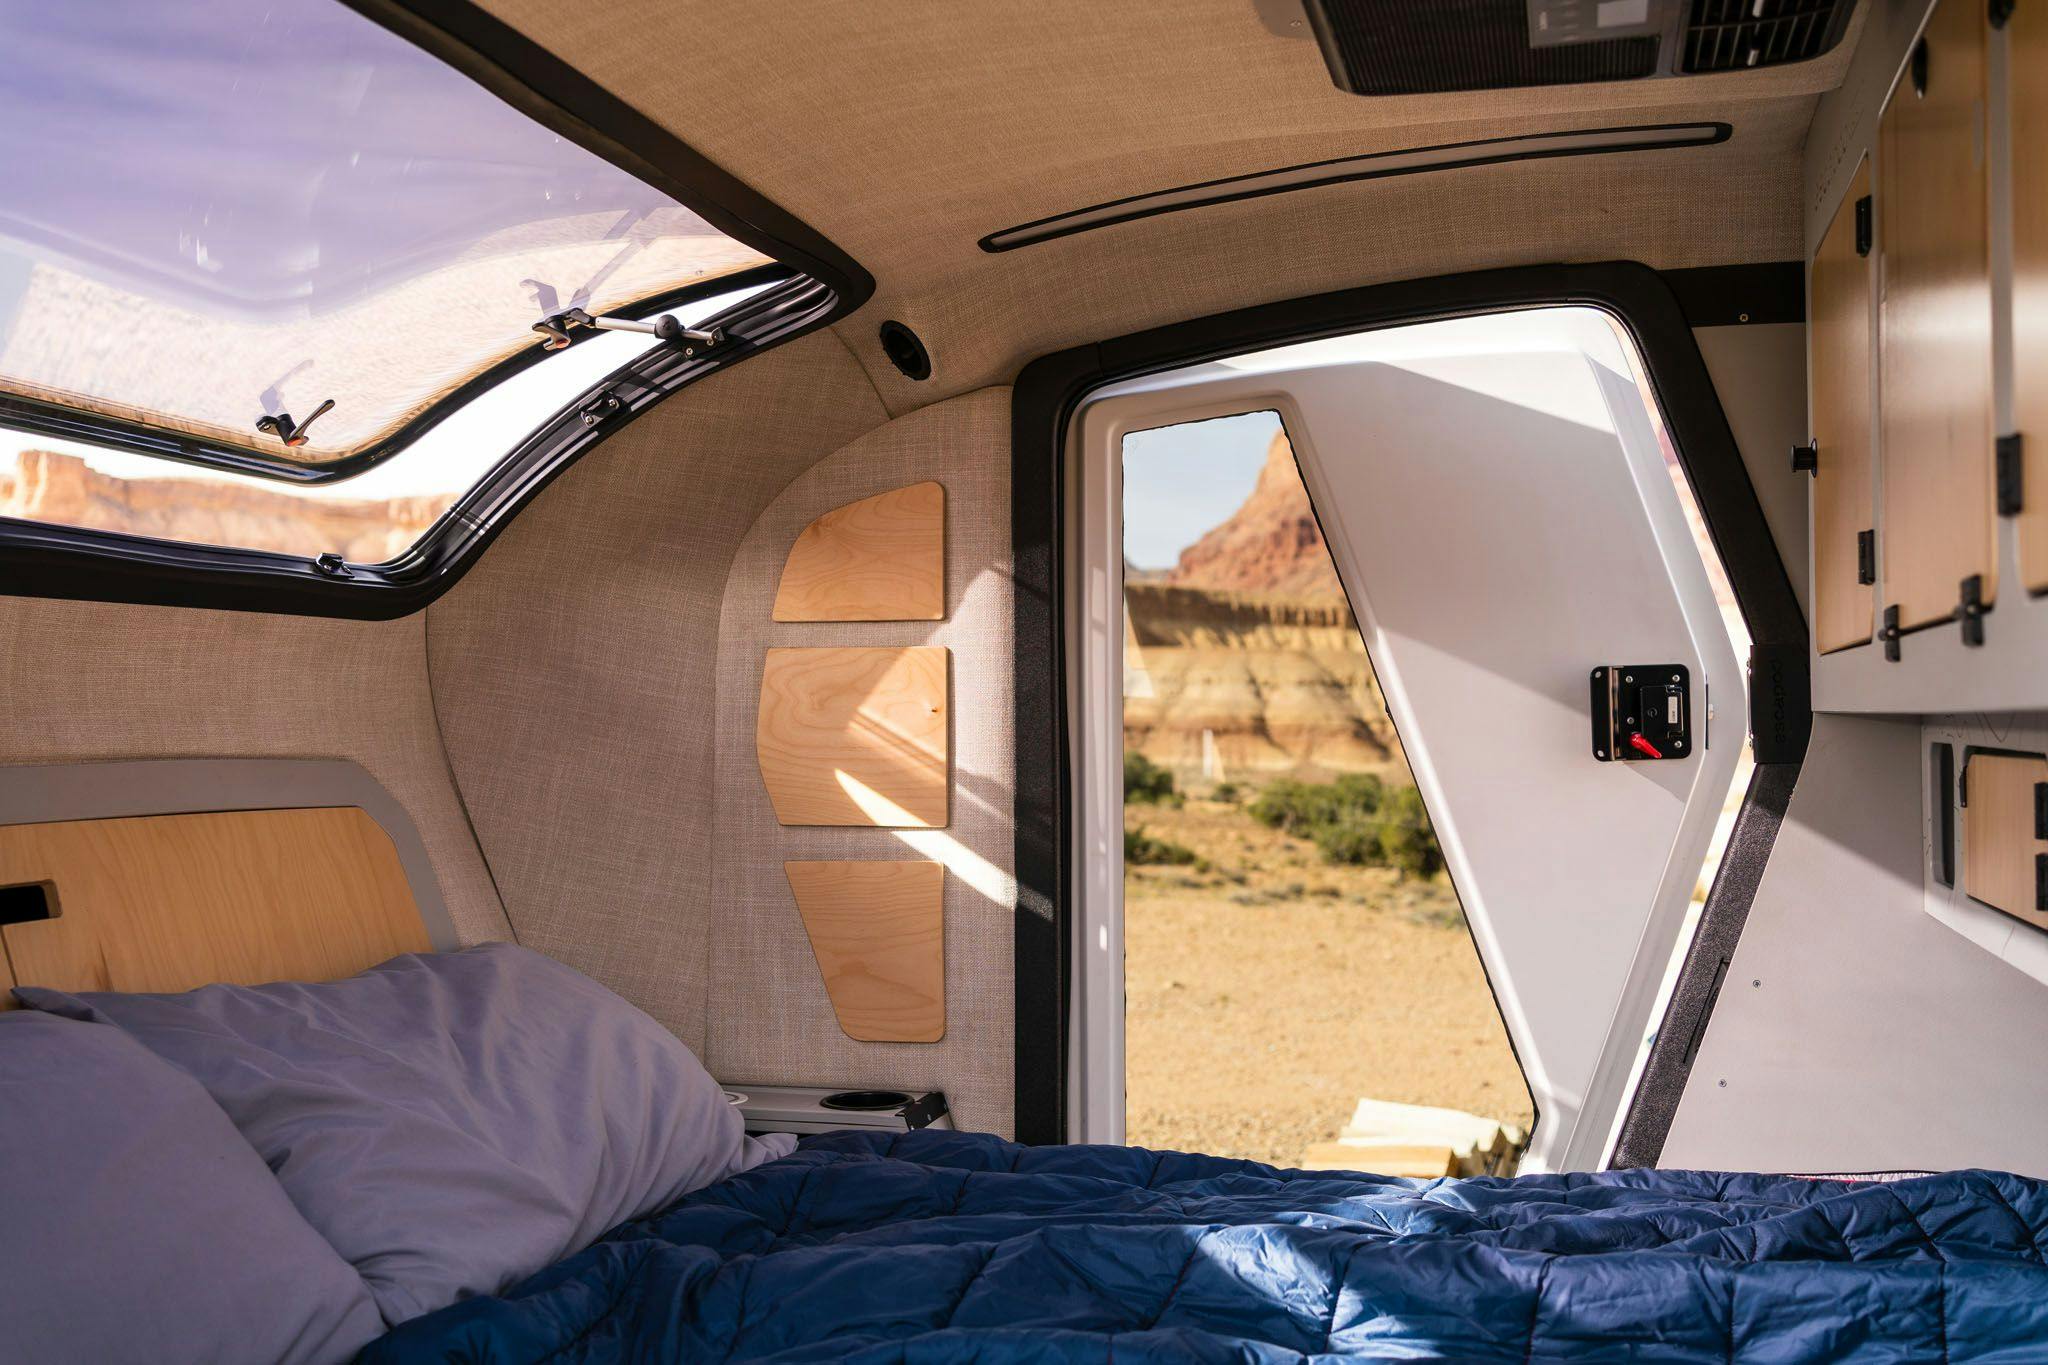 The interior of a teardrop camper, displaying a queen bed, double doors, and a stargazer window